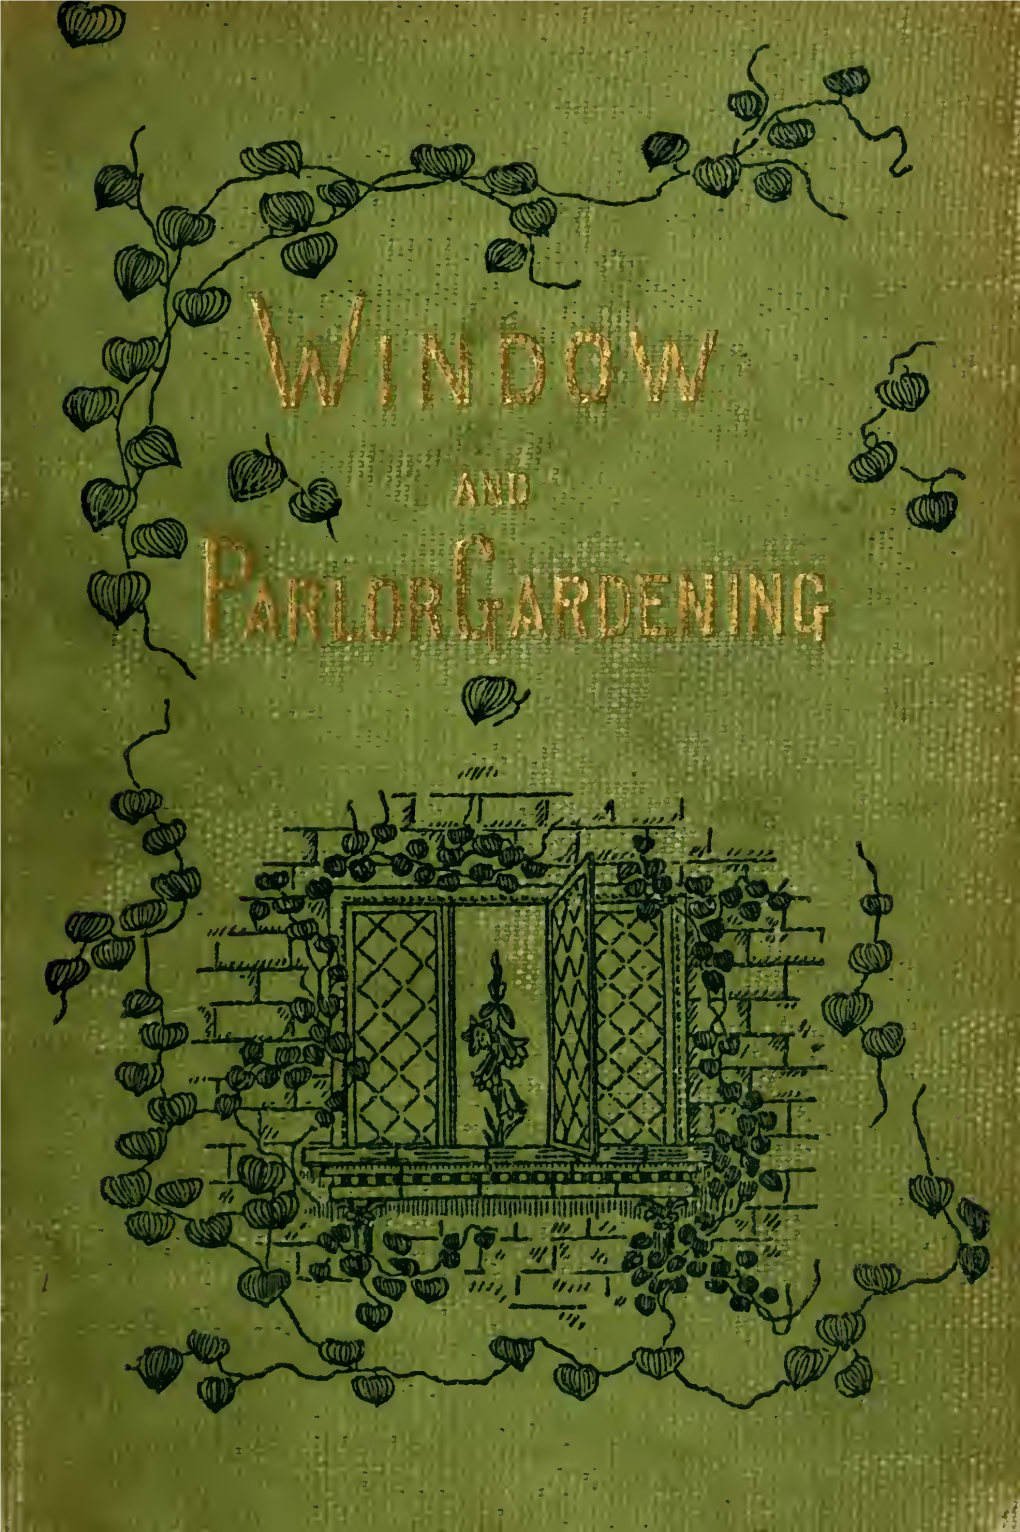 Window and Parlor Gardening